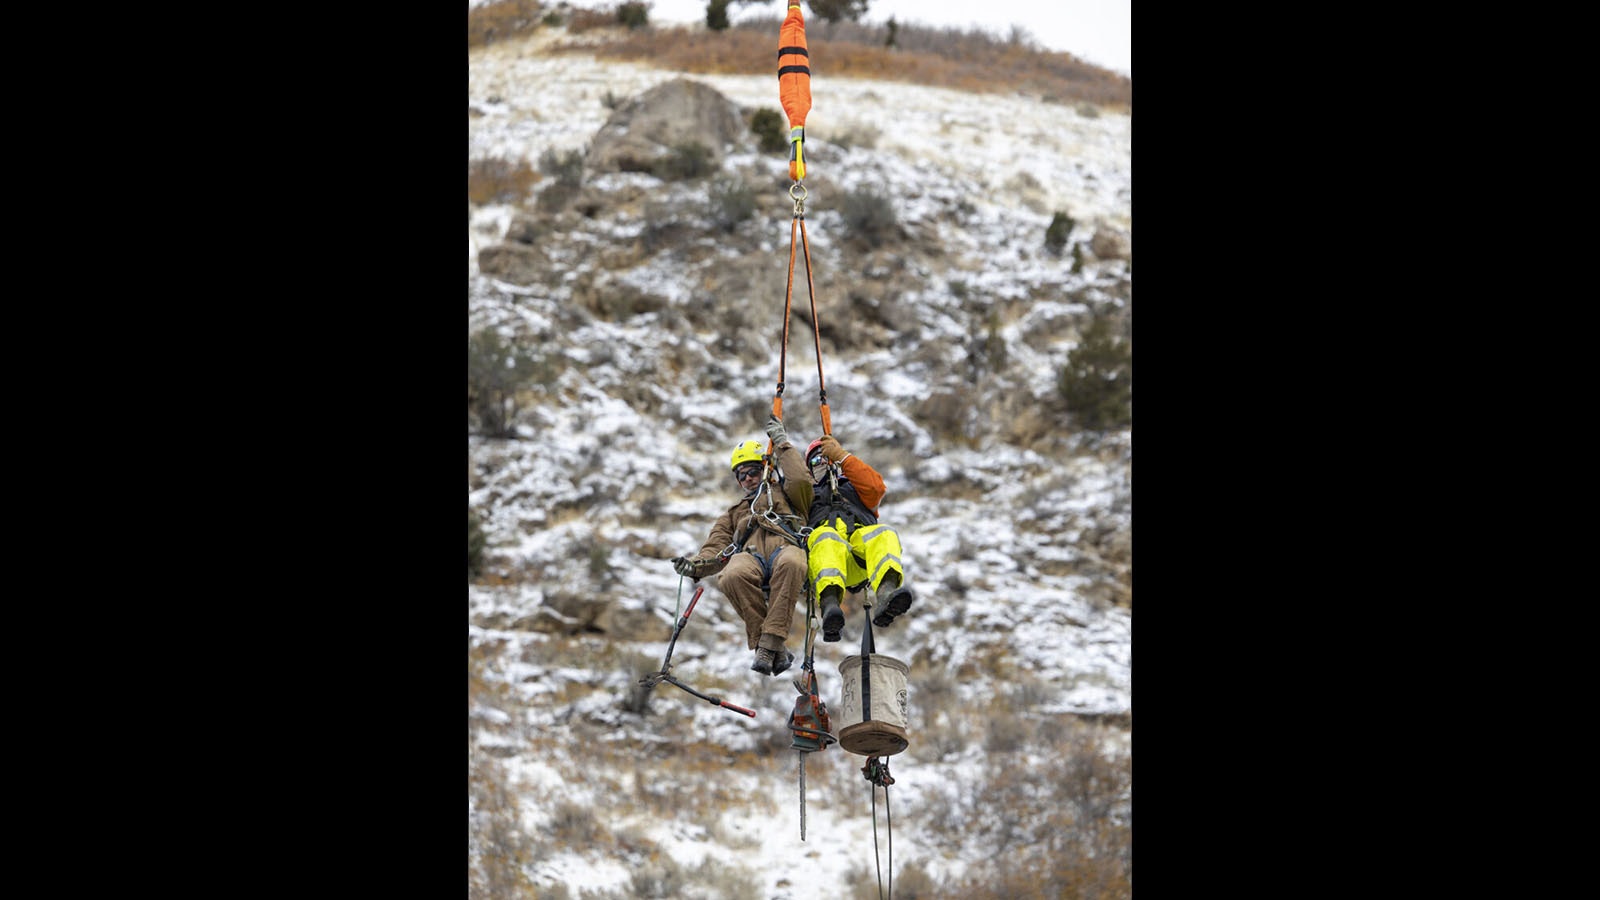 Electrical linemen students train to service power lines and equipment dangling from a helicopter.